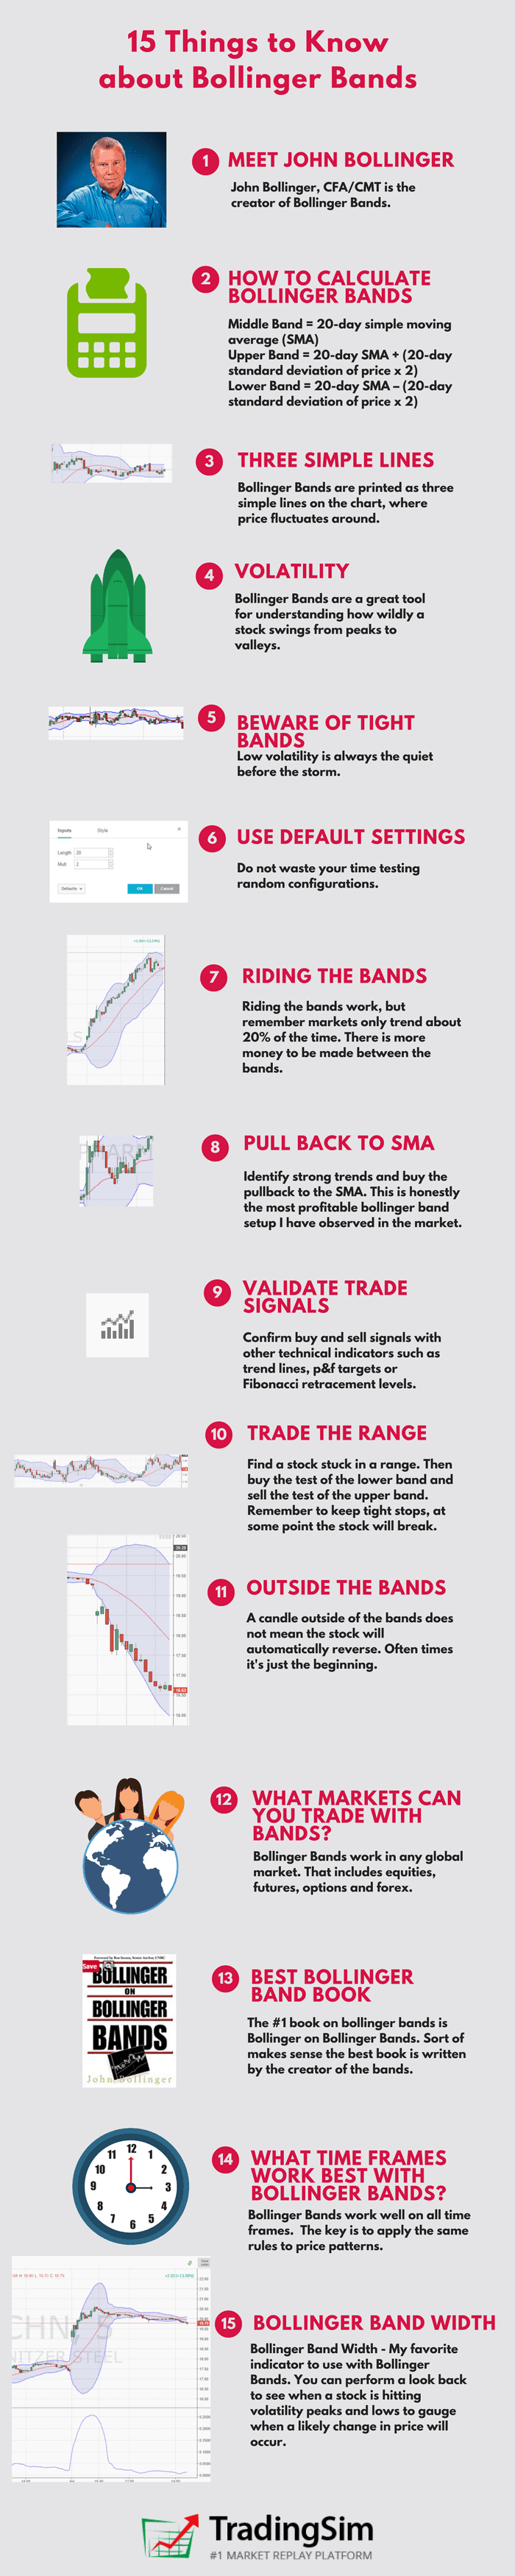 15 Things to Know about Bollinger Bands